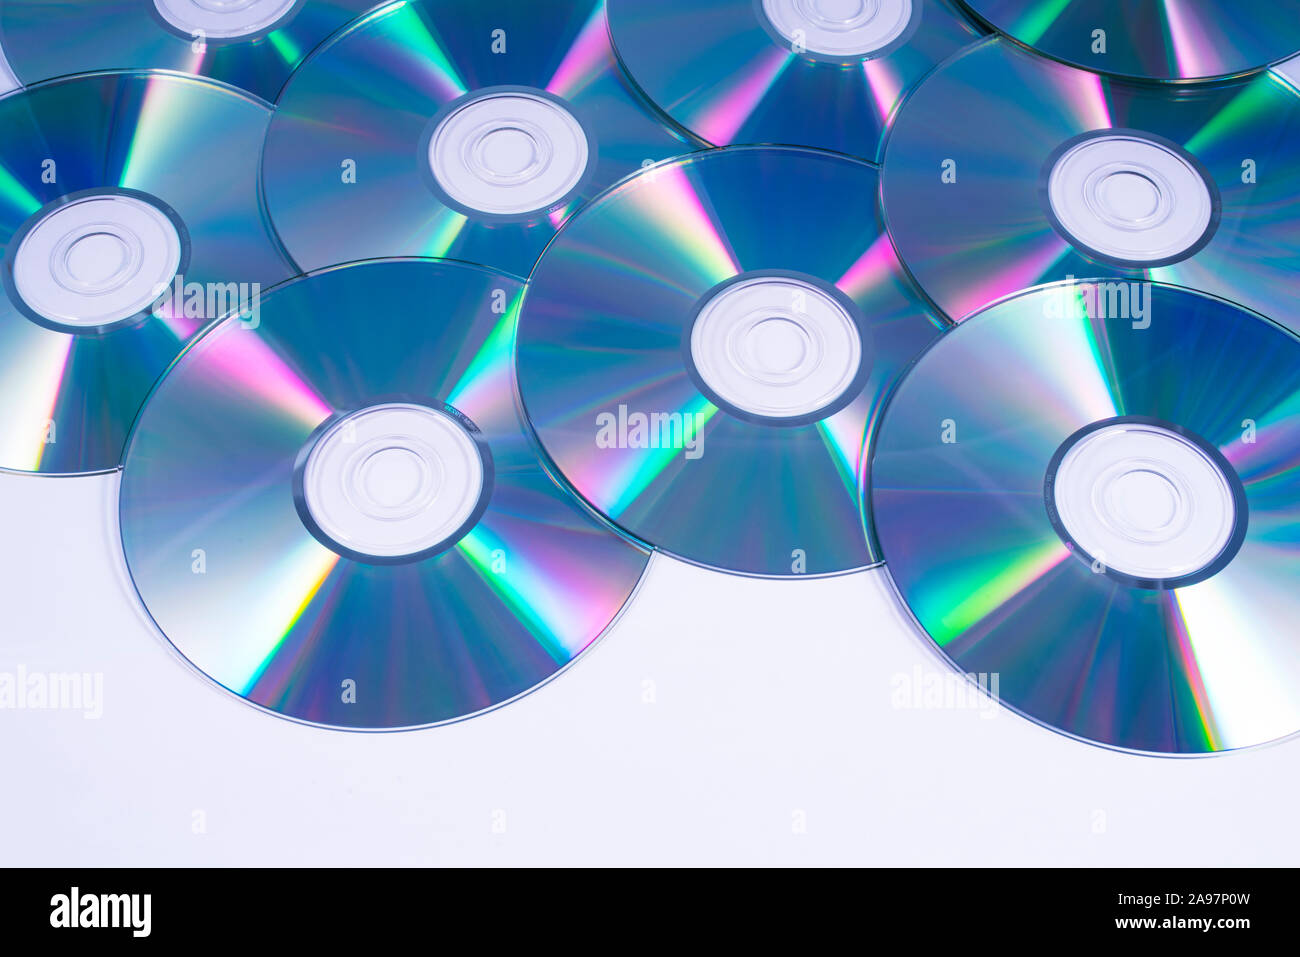 A shot of shiny Compact Discs or CDs, over a white background. Stock Photo